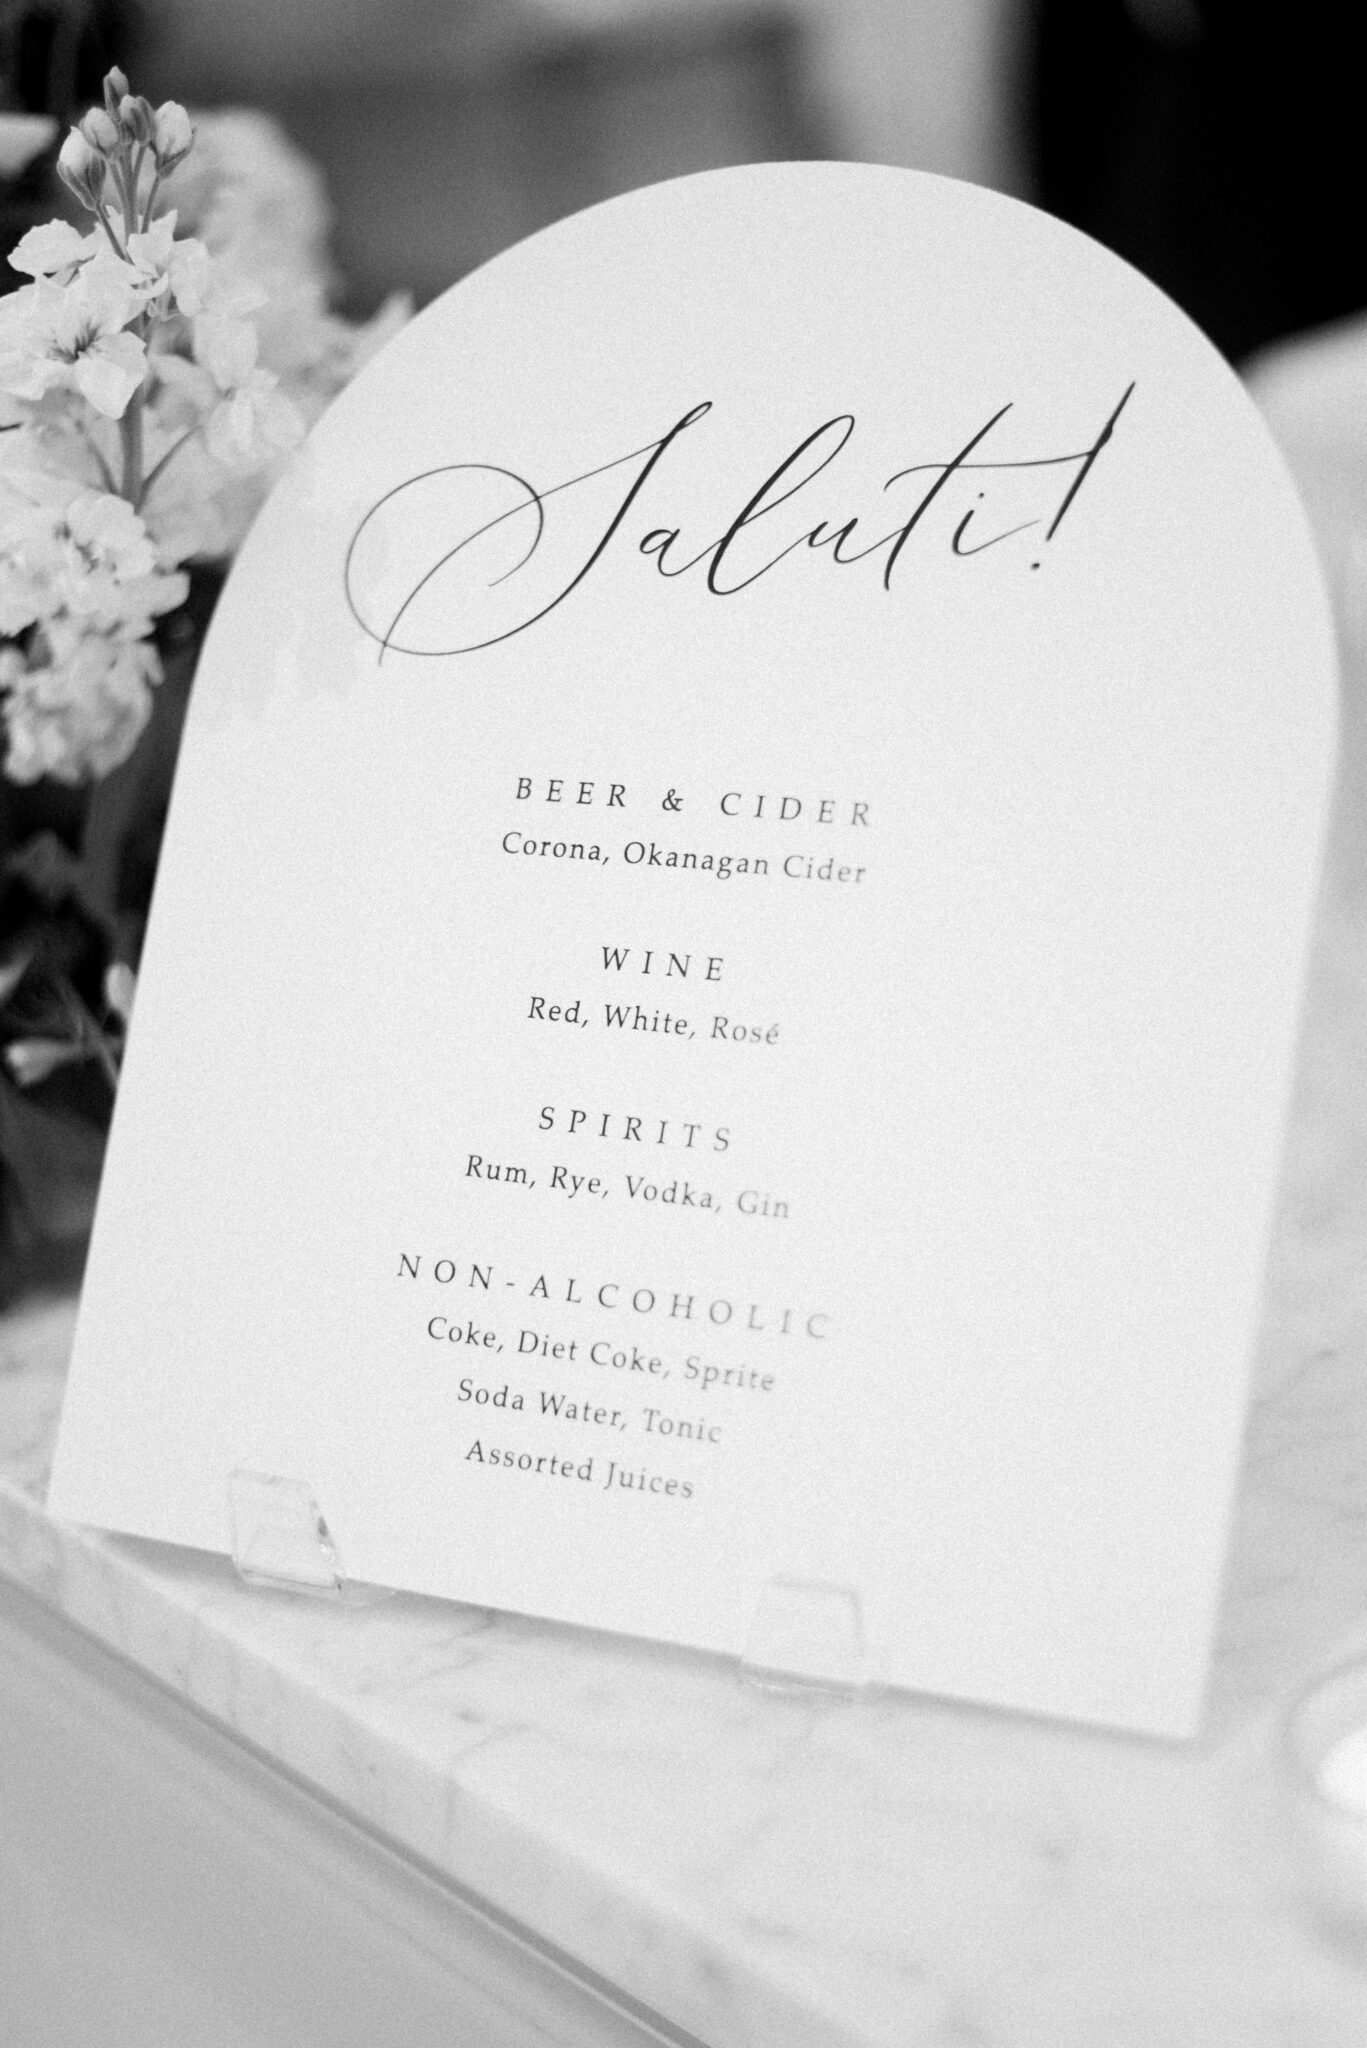 White and black wedding reception signage inspiration at an elegant summer wedding reception at Sparrow Lane Events in Alberta. Summer wedding features white roses, greenery blush decor accents and warm wood tones.